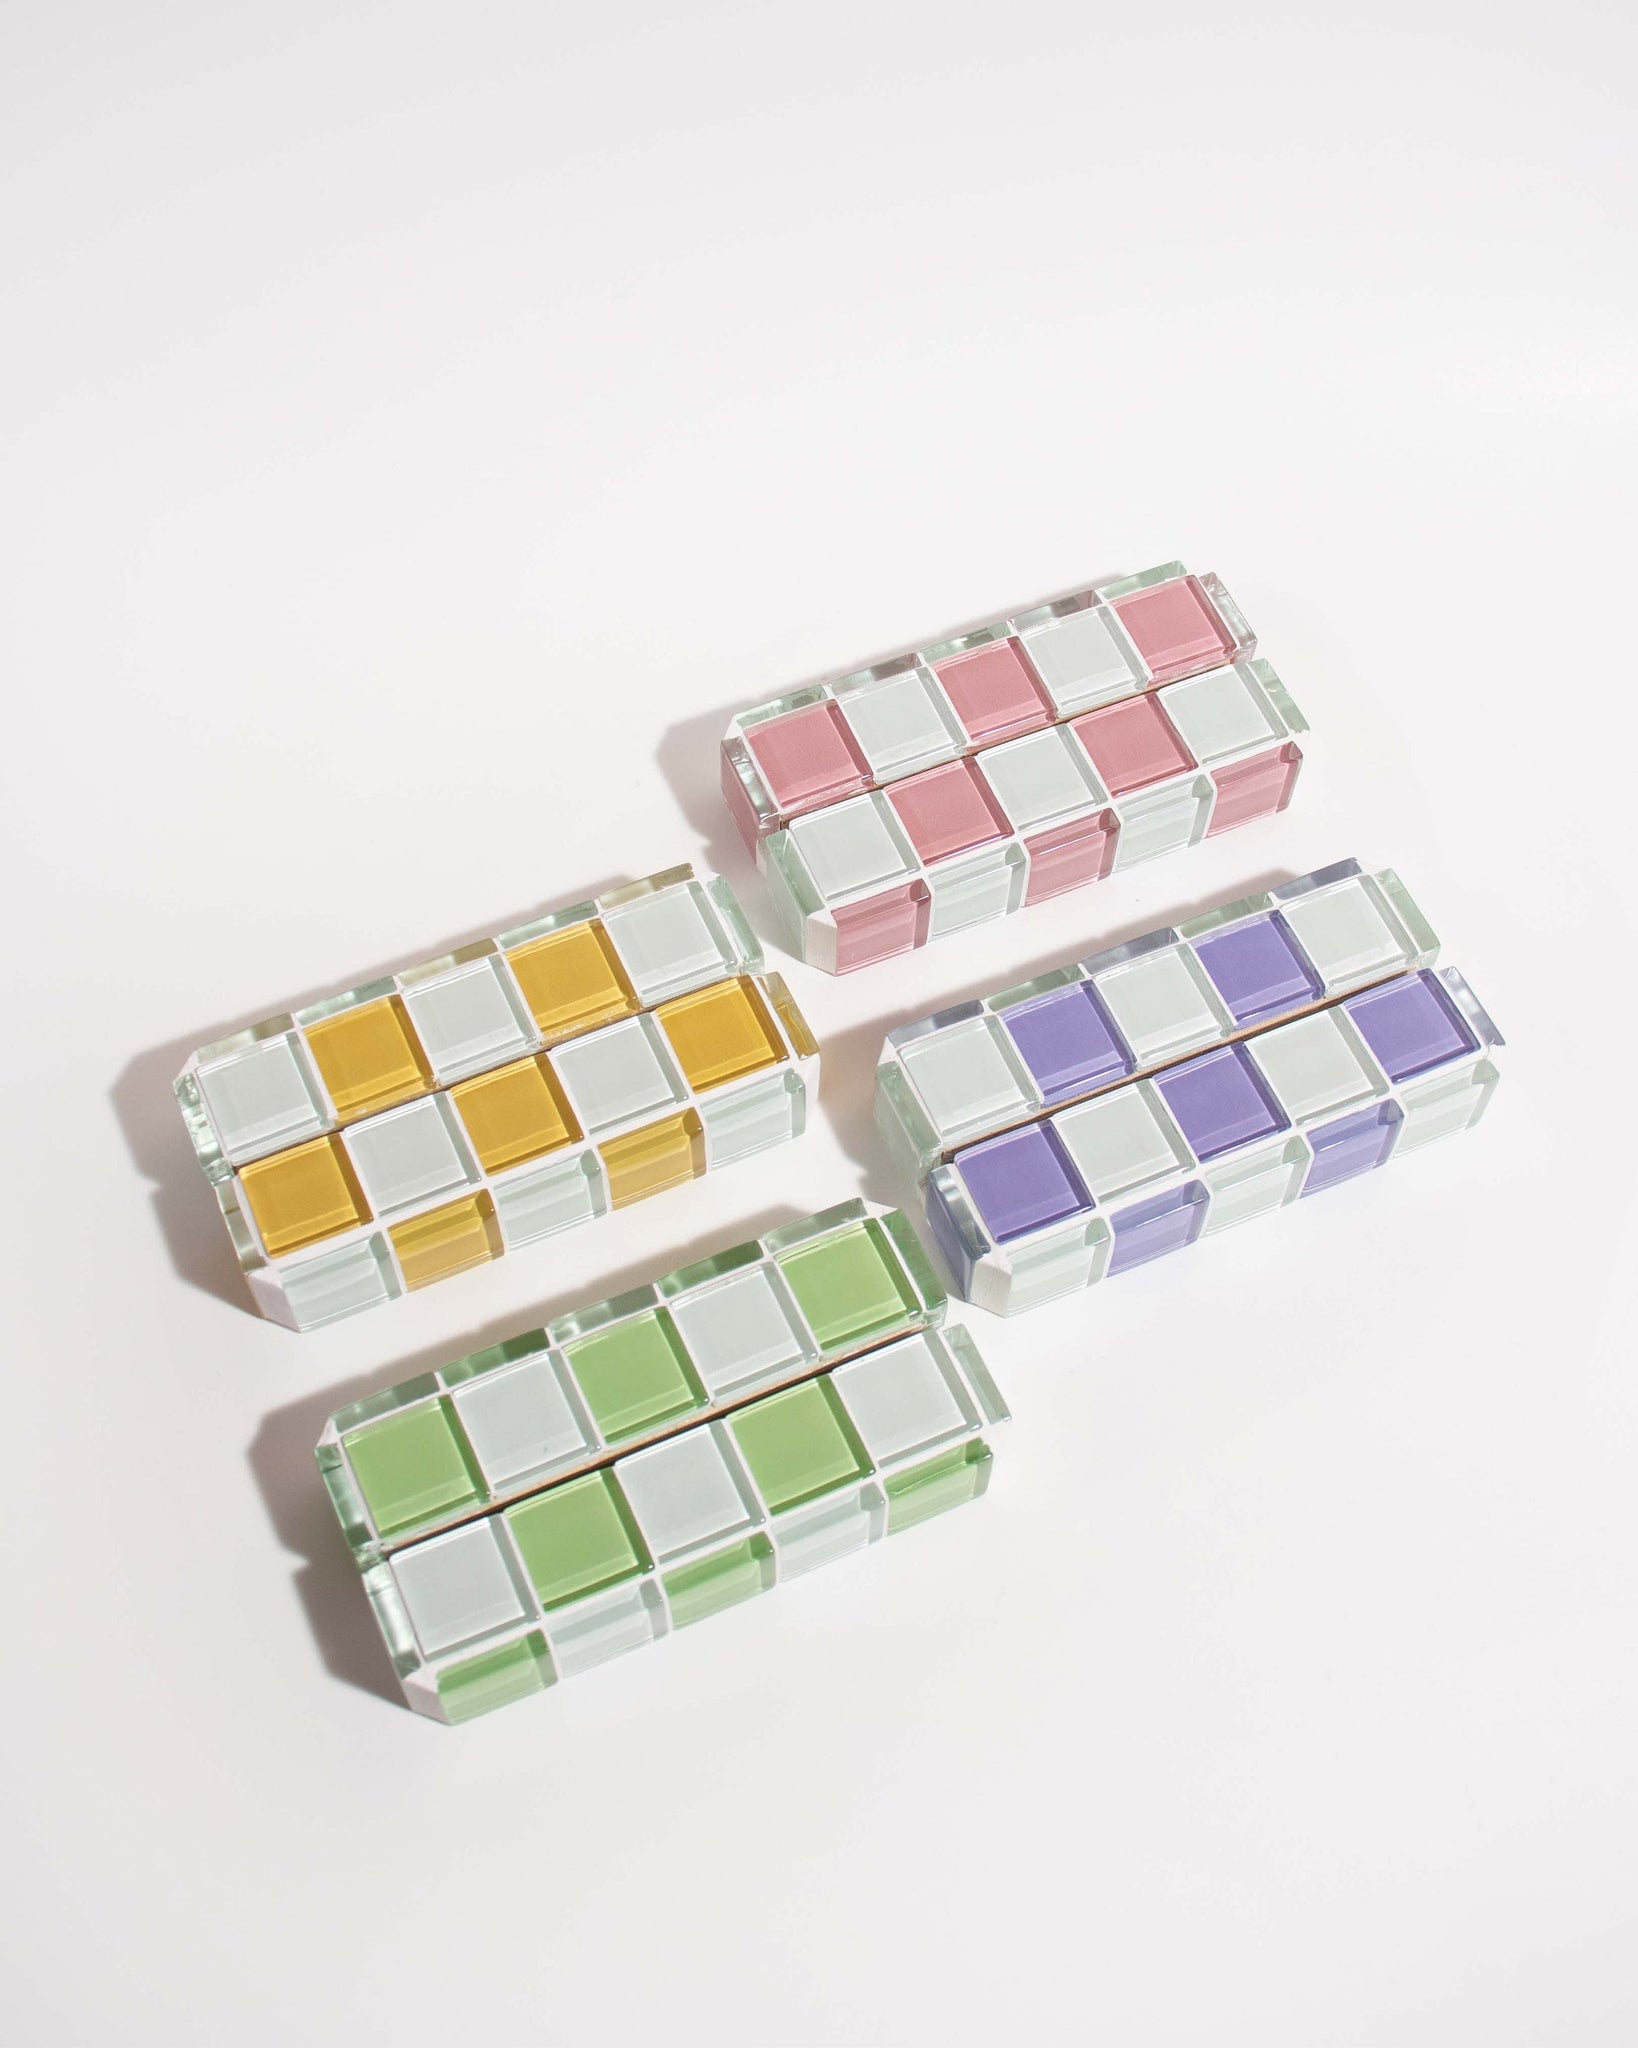 Checkered Tile Photo Stand | Picture Stand | Card Holder | Menu Stand Holder | Wedding, Modern Office Decor